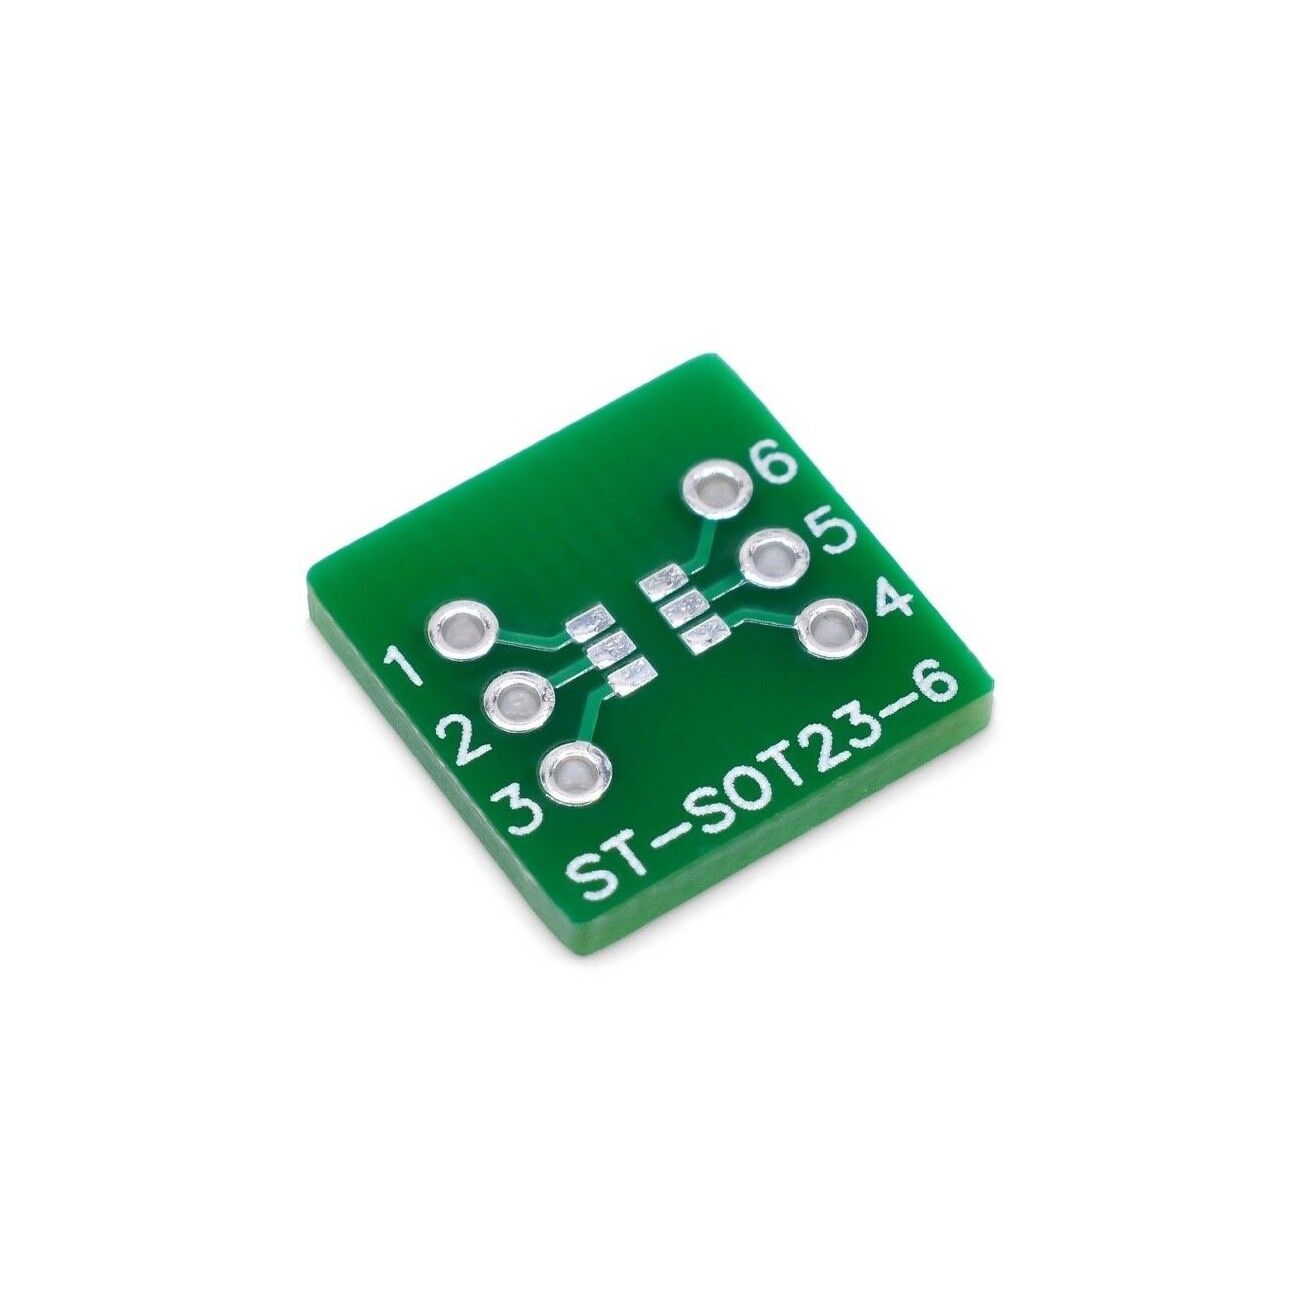 SOT23-6 (6 Pin) SMD to DIP Adapter, PCB Breadboard Adapter ST-SOT23-6,  5 Pieces